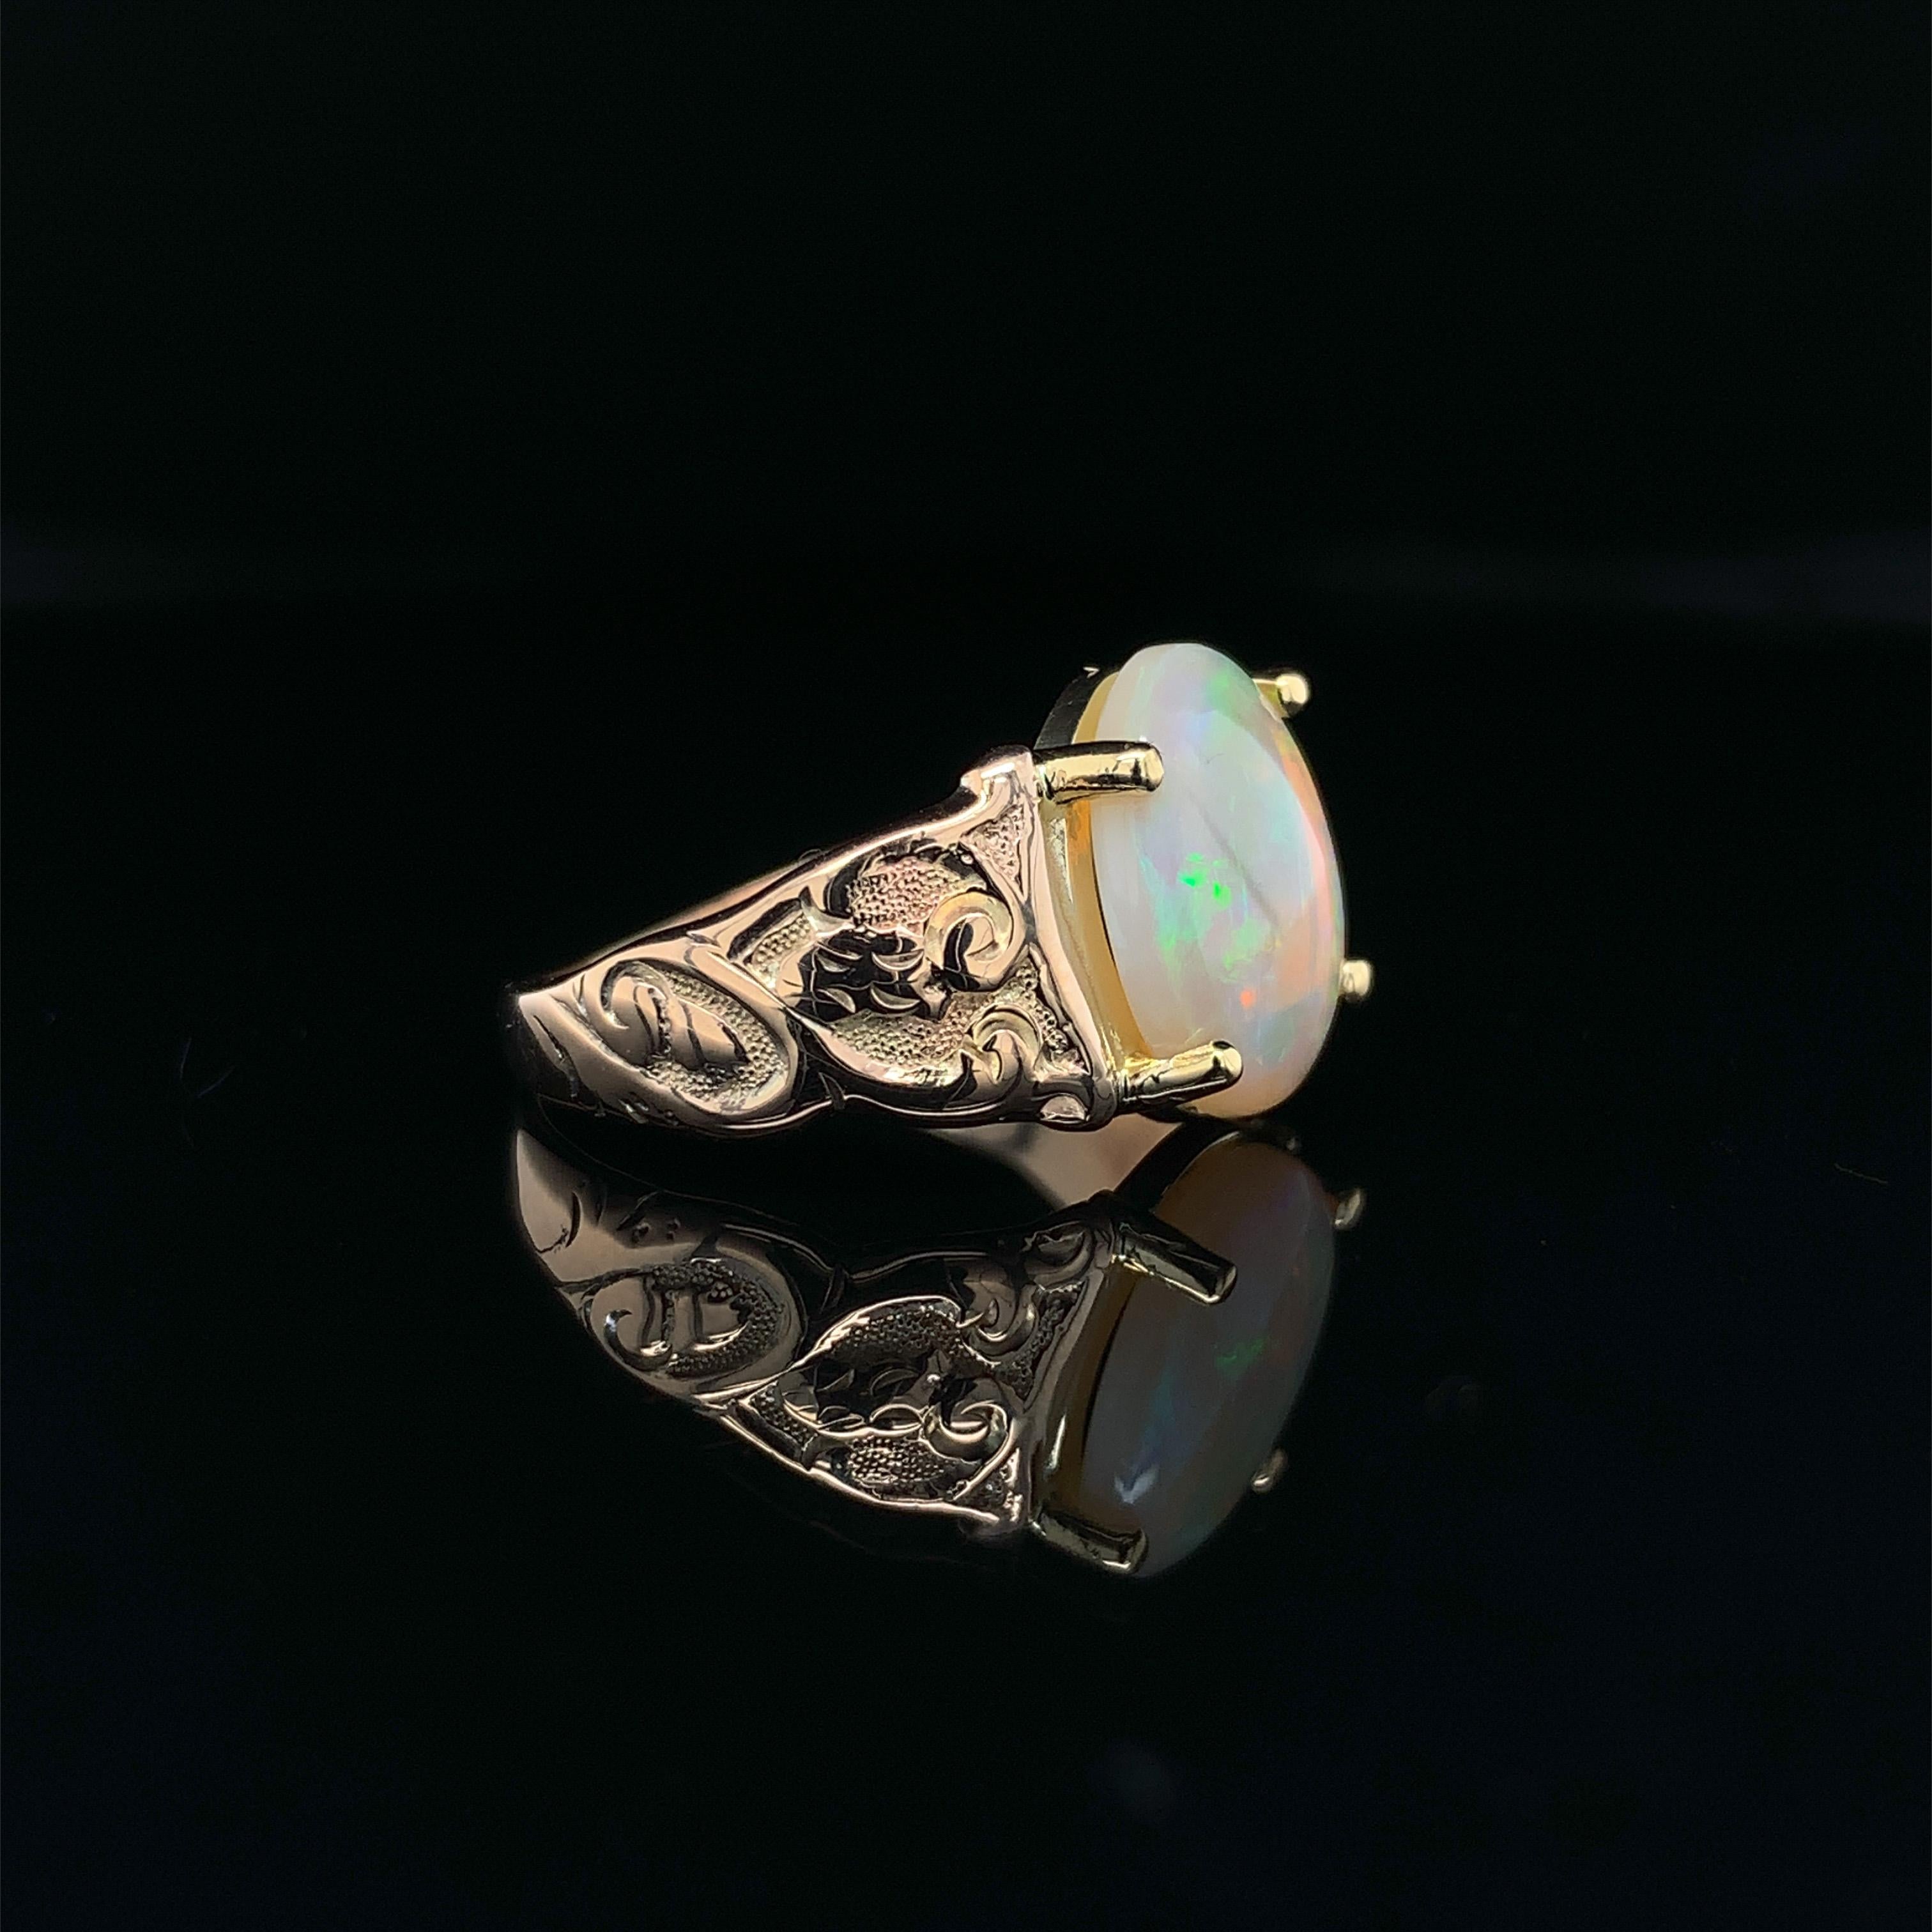 Vintage 10K yellow gold 1.98 carat opal ring with a new 14K yellow gold head. The genuine natural Australian opal measures about 11mm x 9mm. The opal is translucent and has very lively play of color with all colors. The ring has hand engraving on